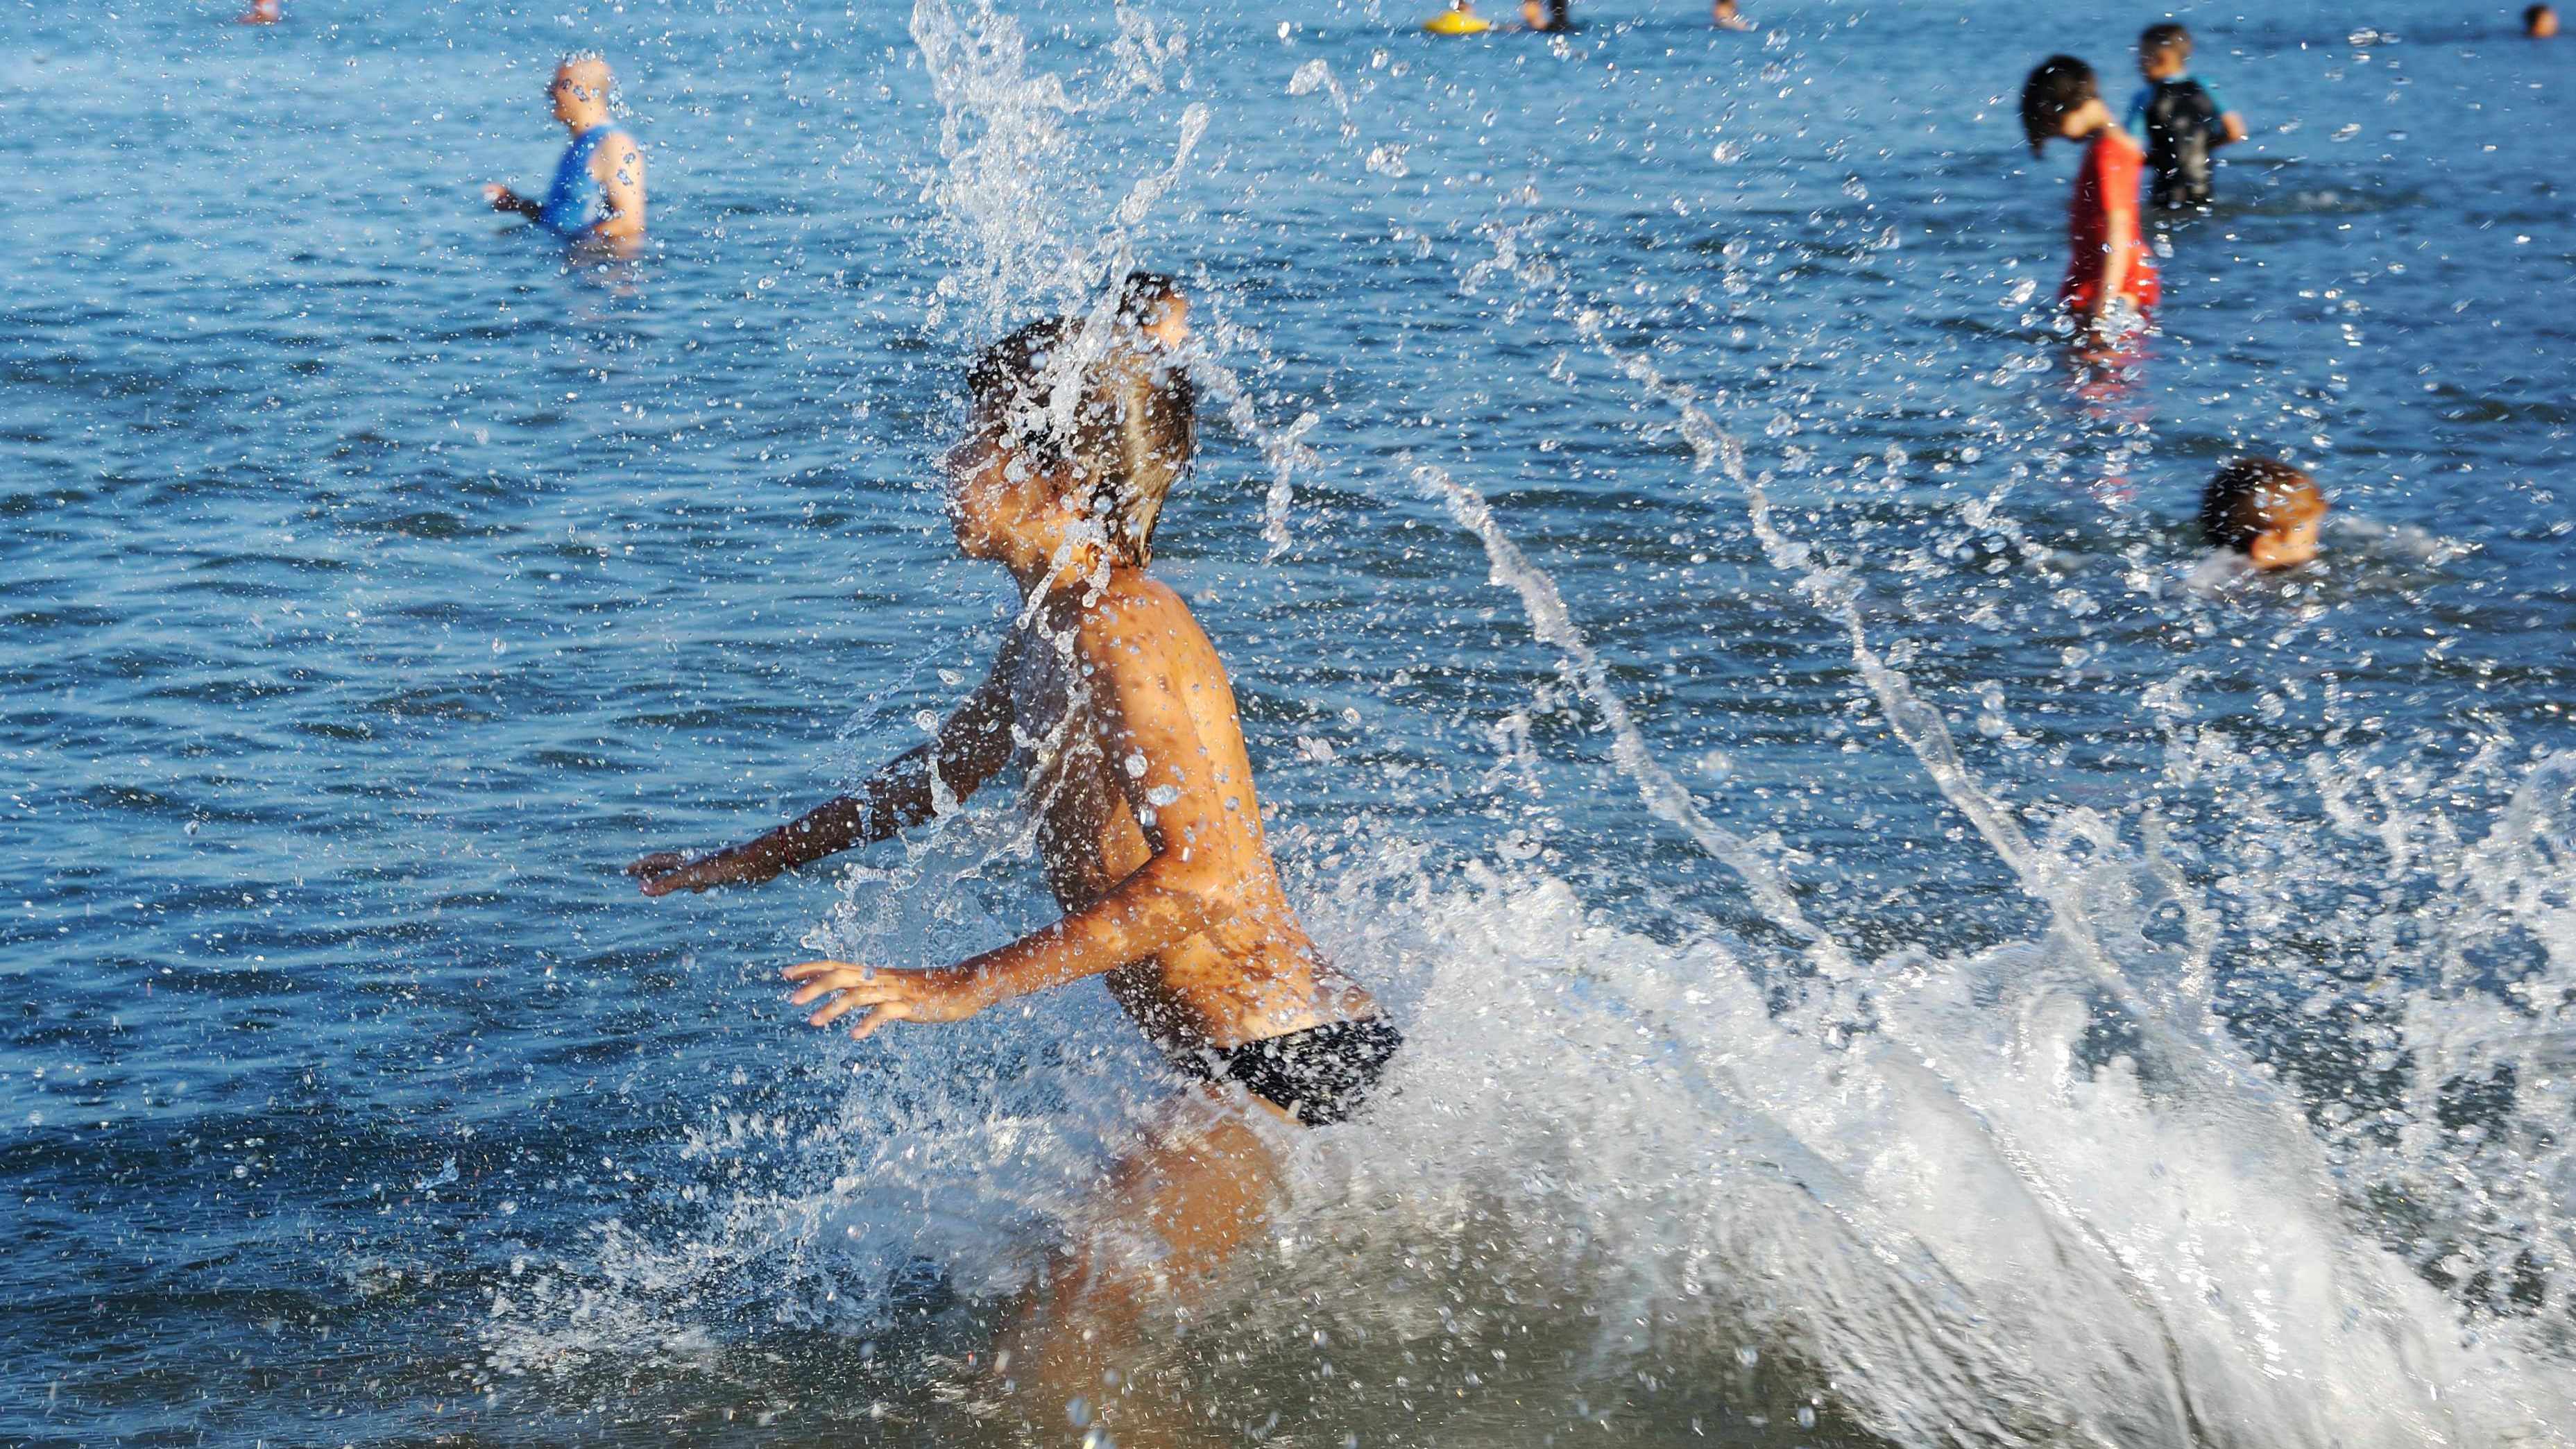 people in lake water swimming and a young child splashing through the water